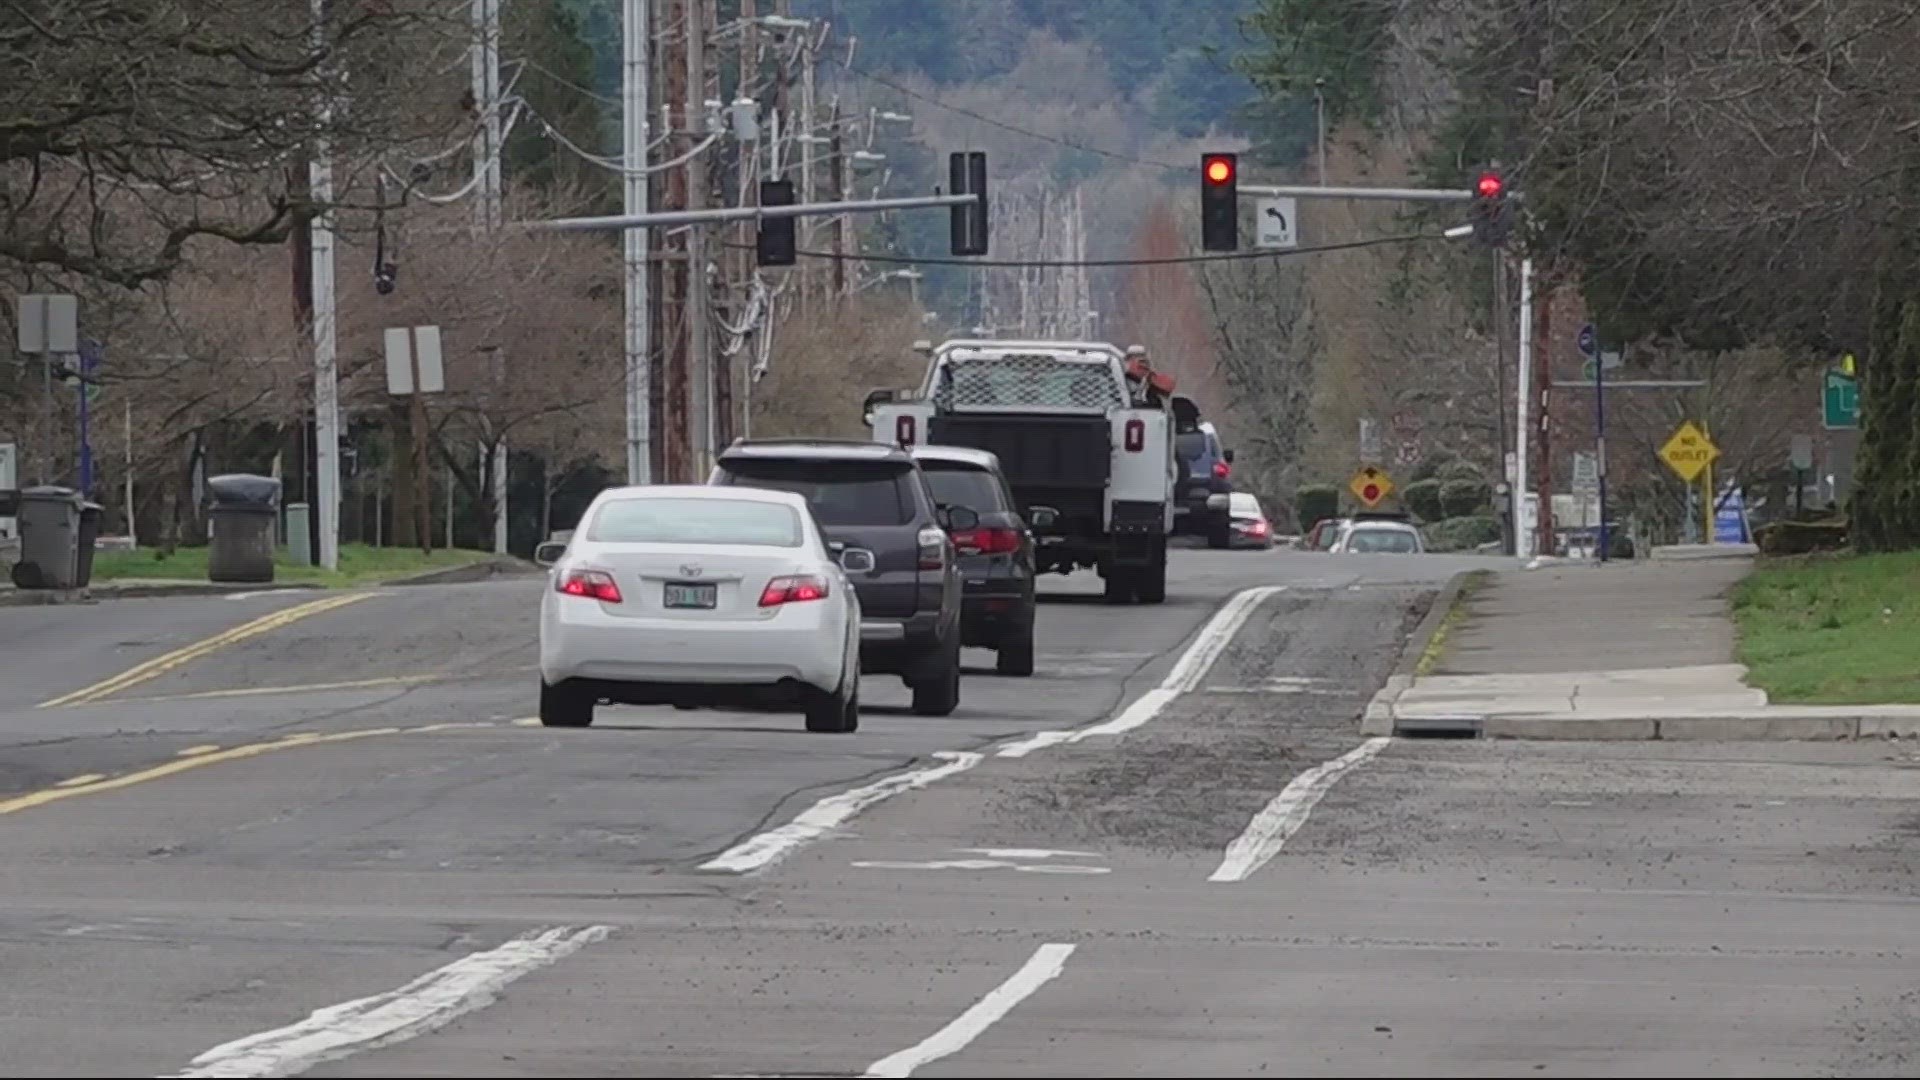 ODOT has reduced the speed limit from 40 down to 30 on Hall Boulevard, between 92nd and Pfaffle after the city of Tigard requested the reduction.